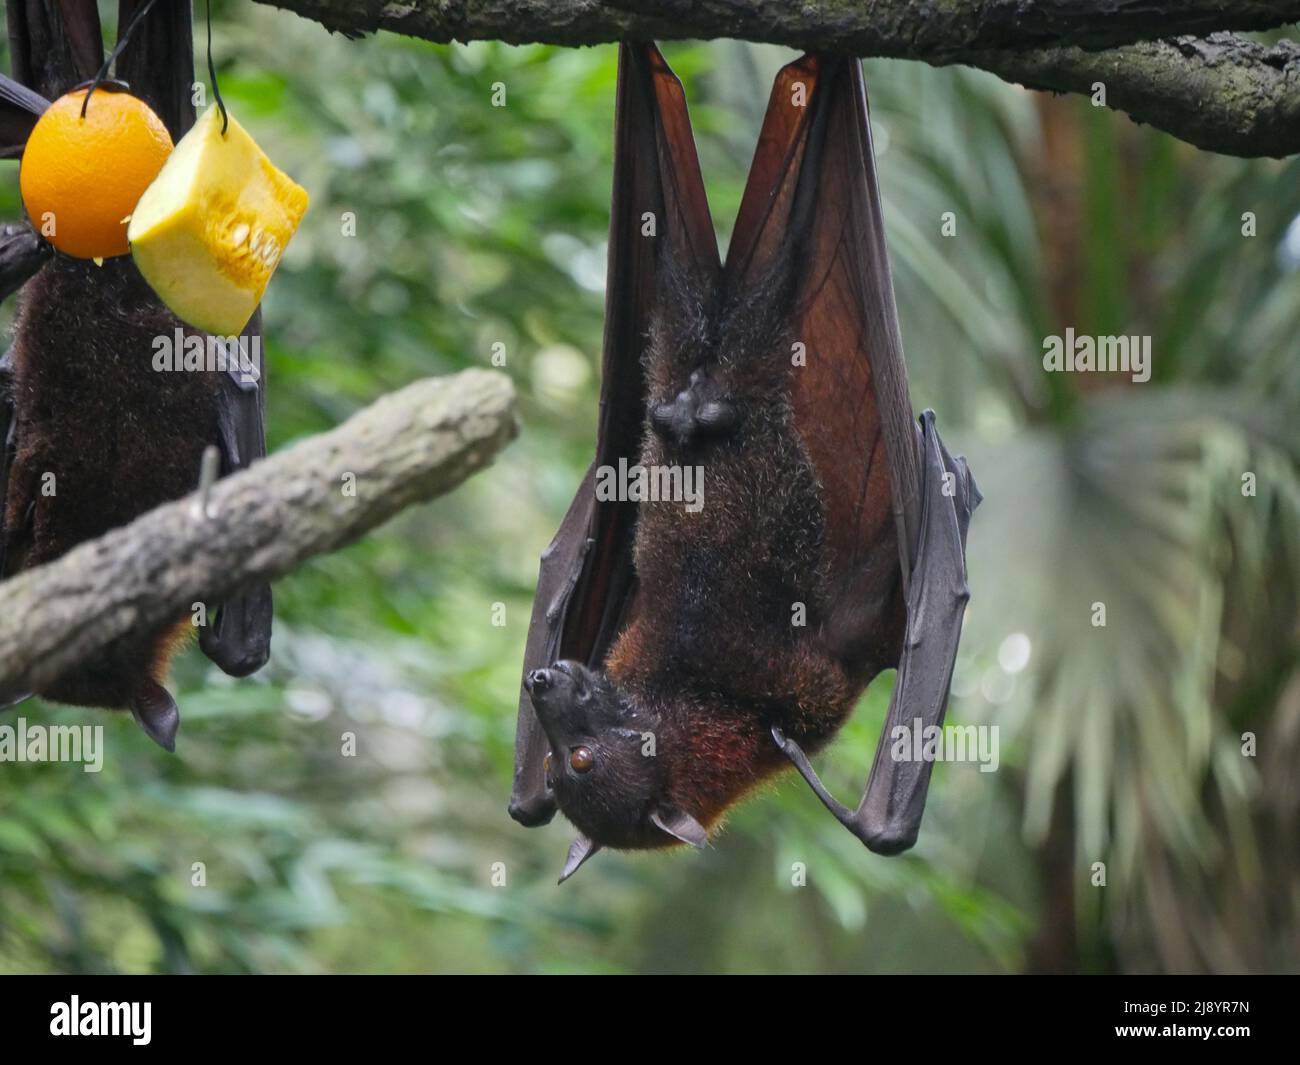 Male Fruit Bat also known as Indian flying fox hanging upside down eating watermelon fruits Stock Photo